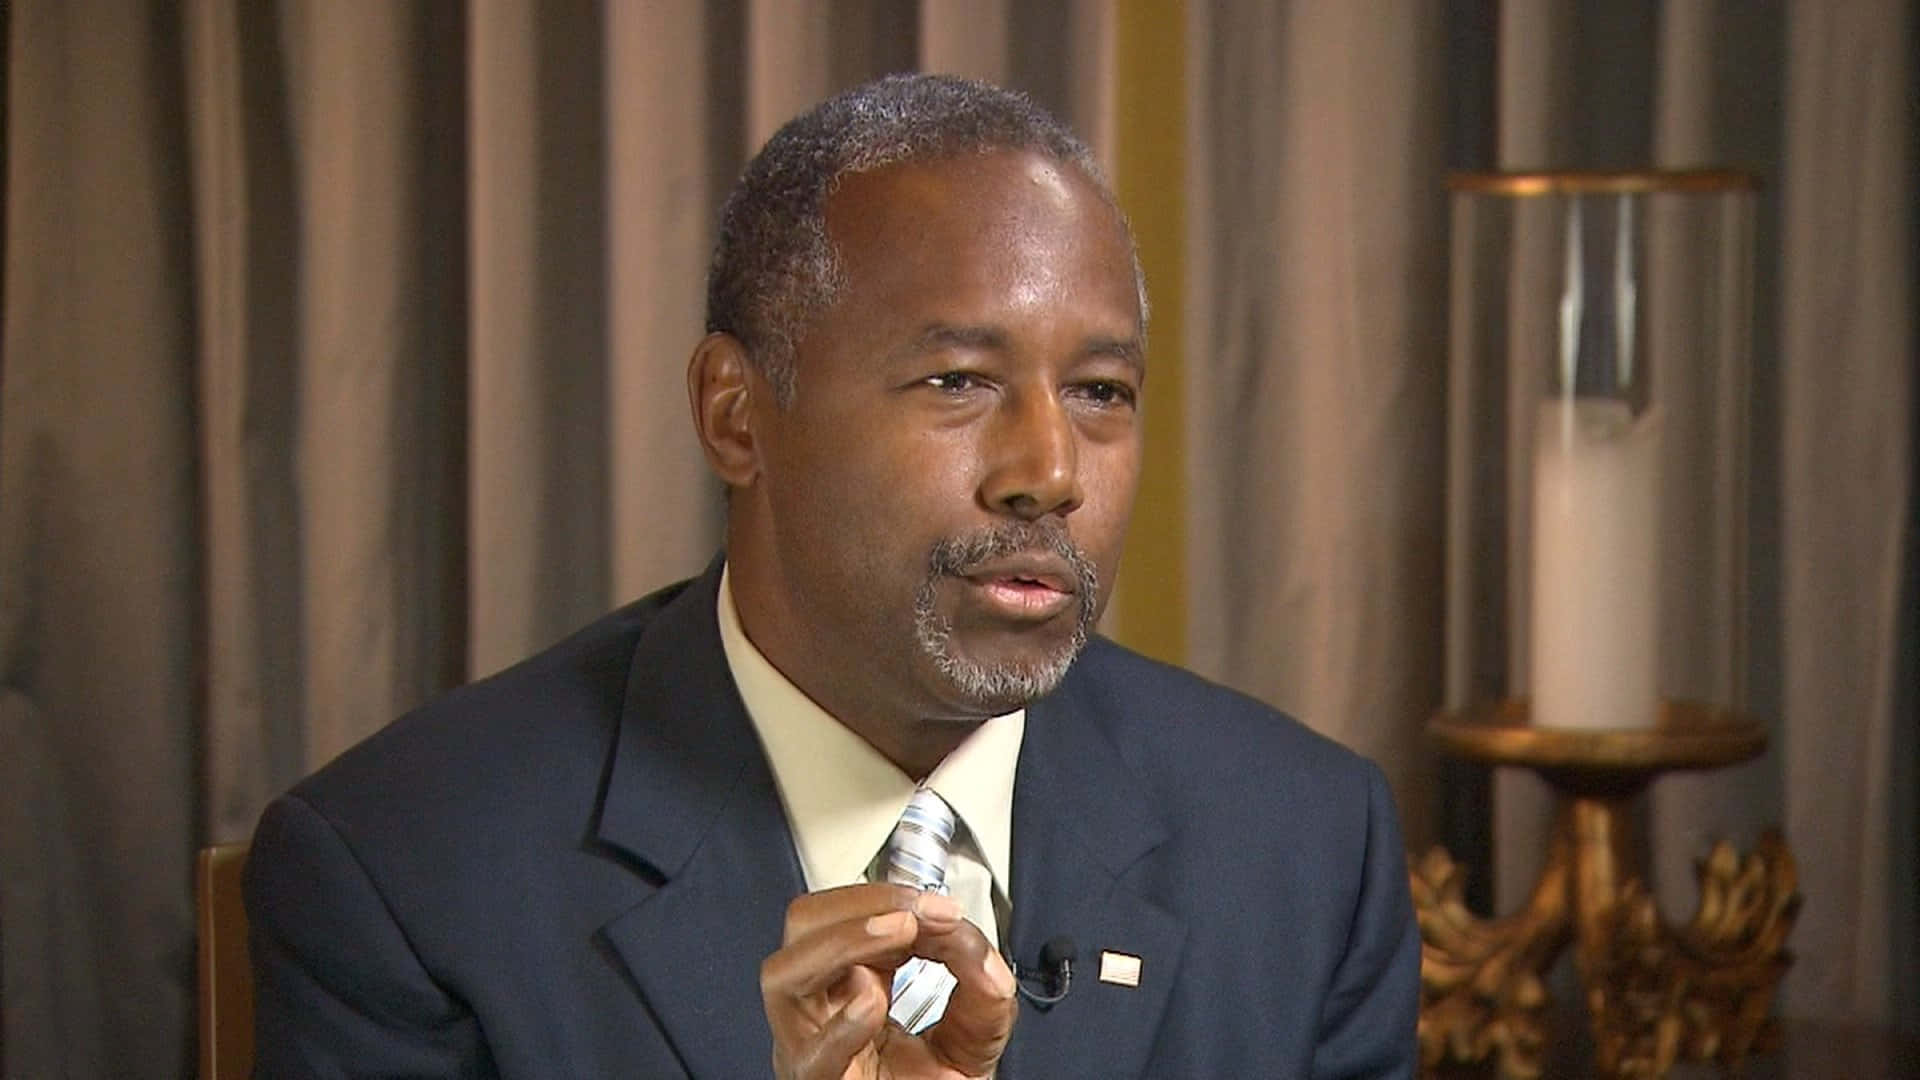 Caption: Ben Carson Engaged in Discussion Wallpaper